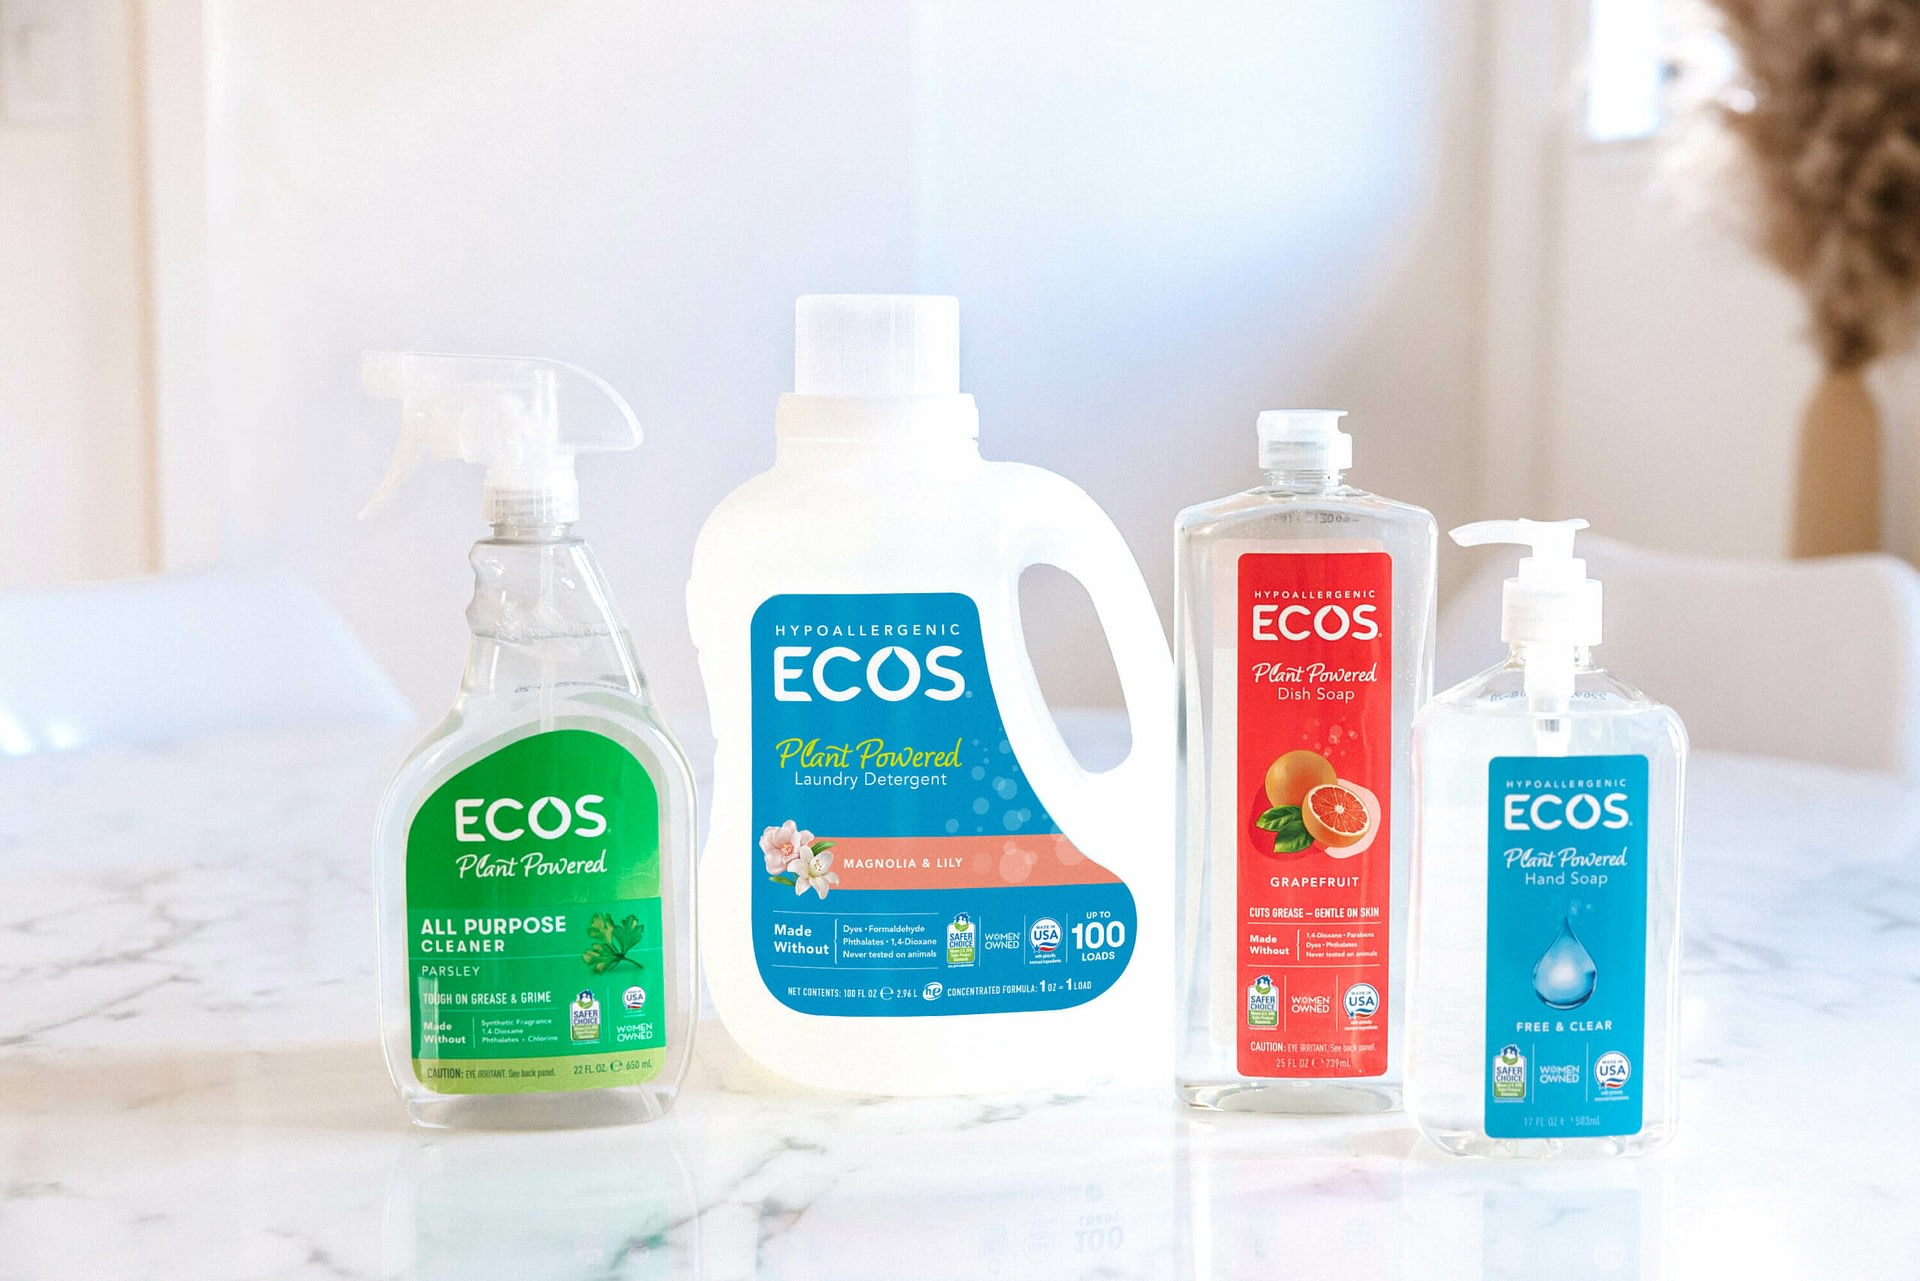 ECOS safer choice products